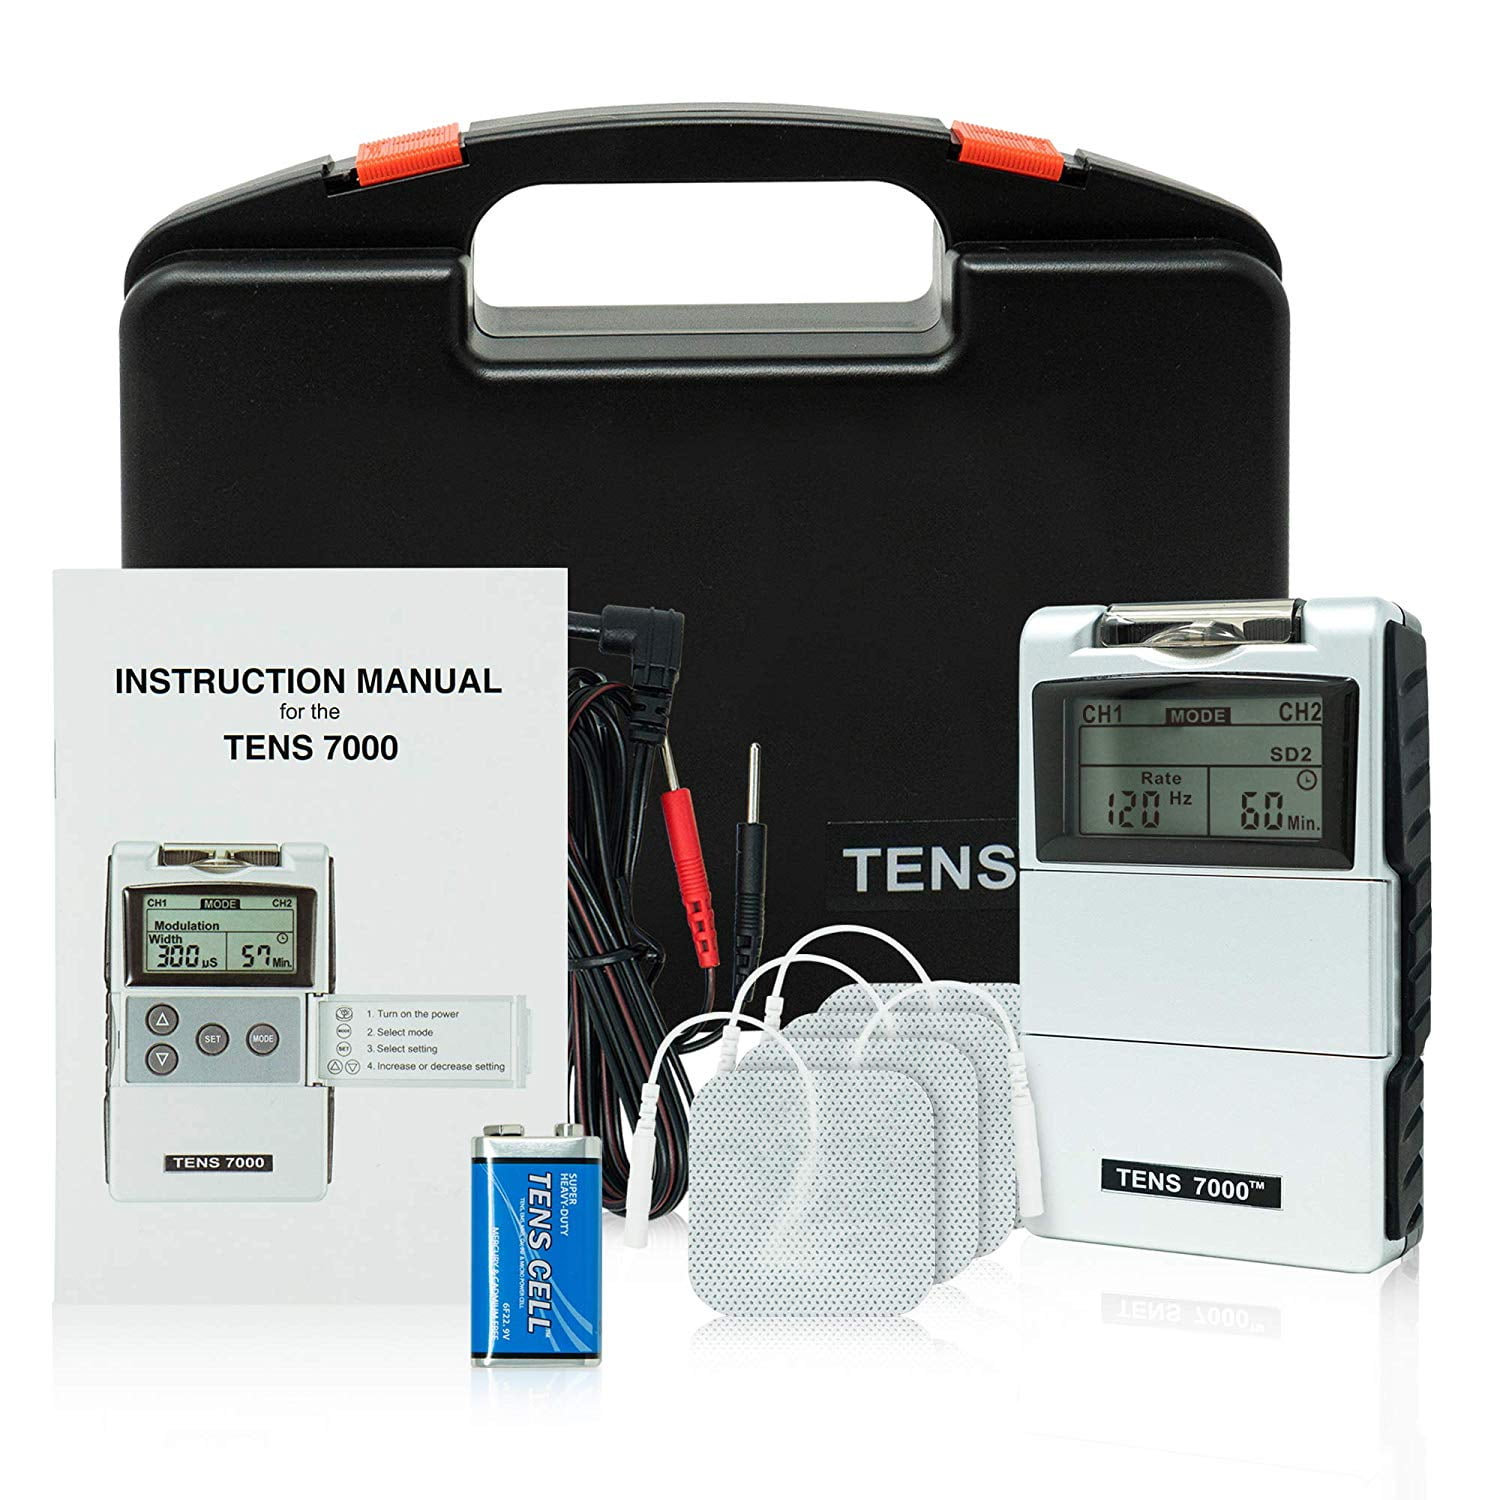 Roscoe Medical Tens 7000 2nd Edition Digital Tens Unit with Accessories-OTC, Size: 8.8 x 2 x 7.8, Silver